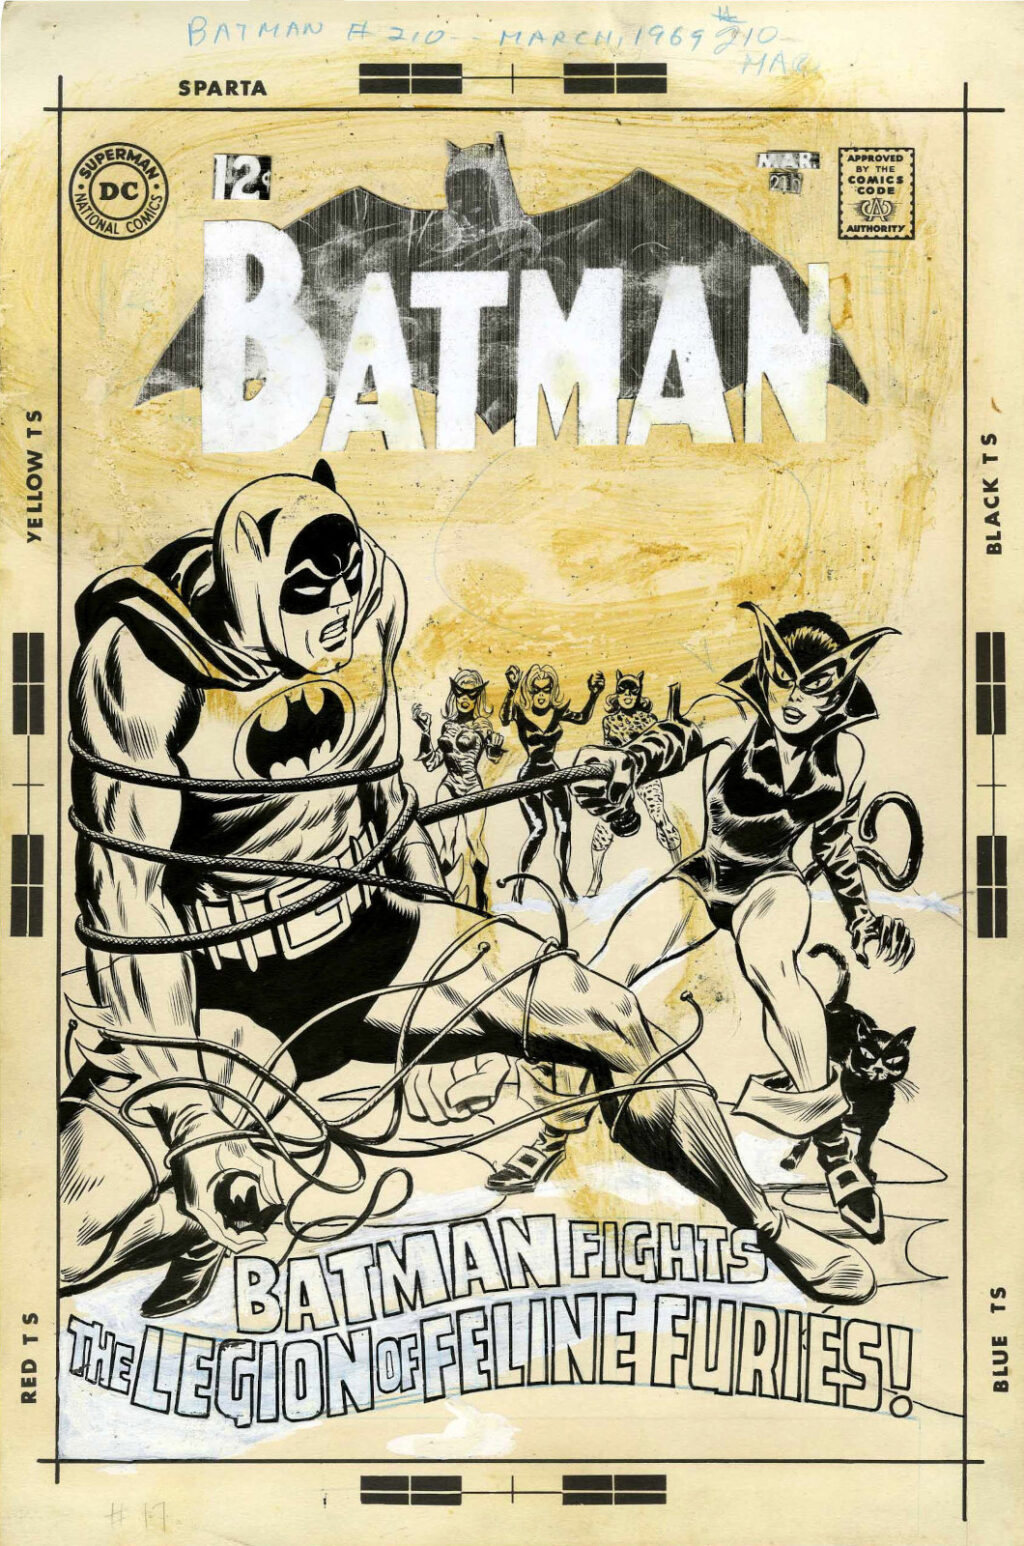 Batman issue 210 unpublished cover by Carmine Infantino and Irv Novick